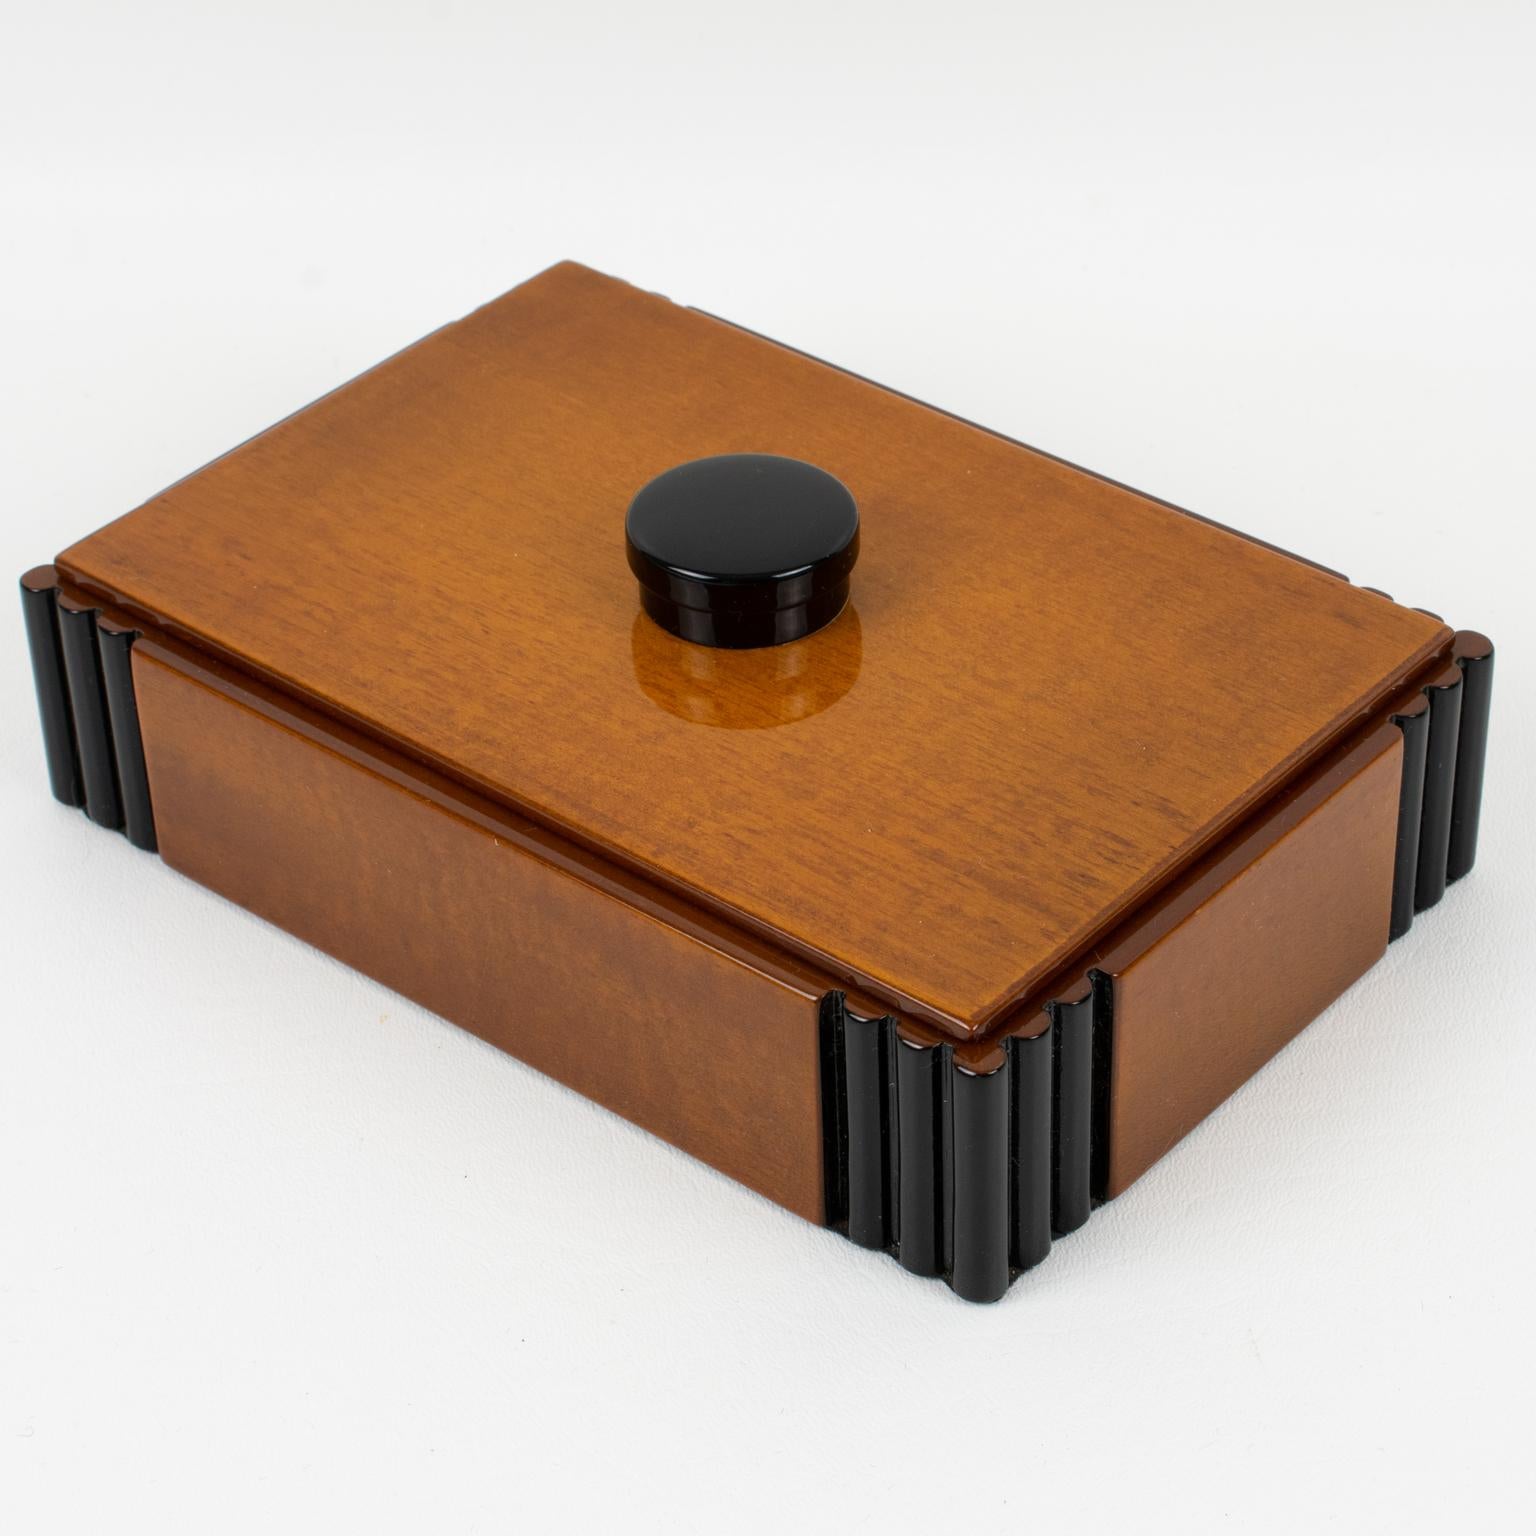 A refined modernist large decorative lidded box. Art Deco typical minimalist rectangular shape with varnish tropical wood and black lacquer carved corners and finial. No visible maker's mark.
Measurements: 7.69 in. wide (19.5 cm) x 5.13 in. deep (13